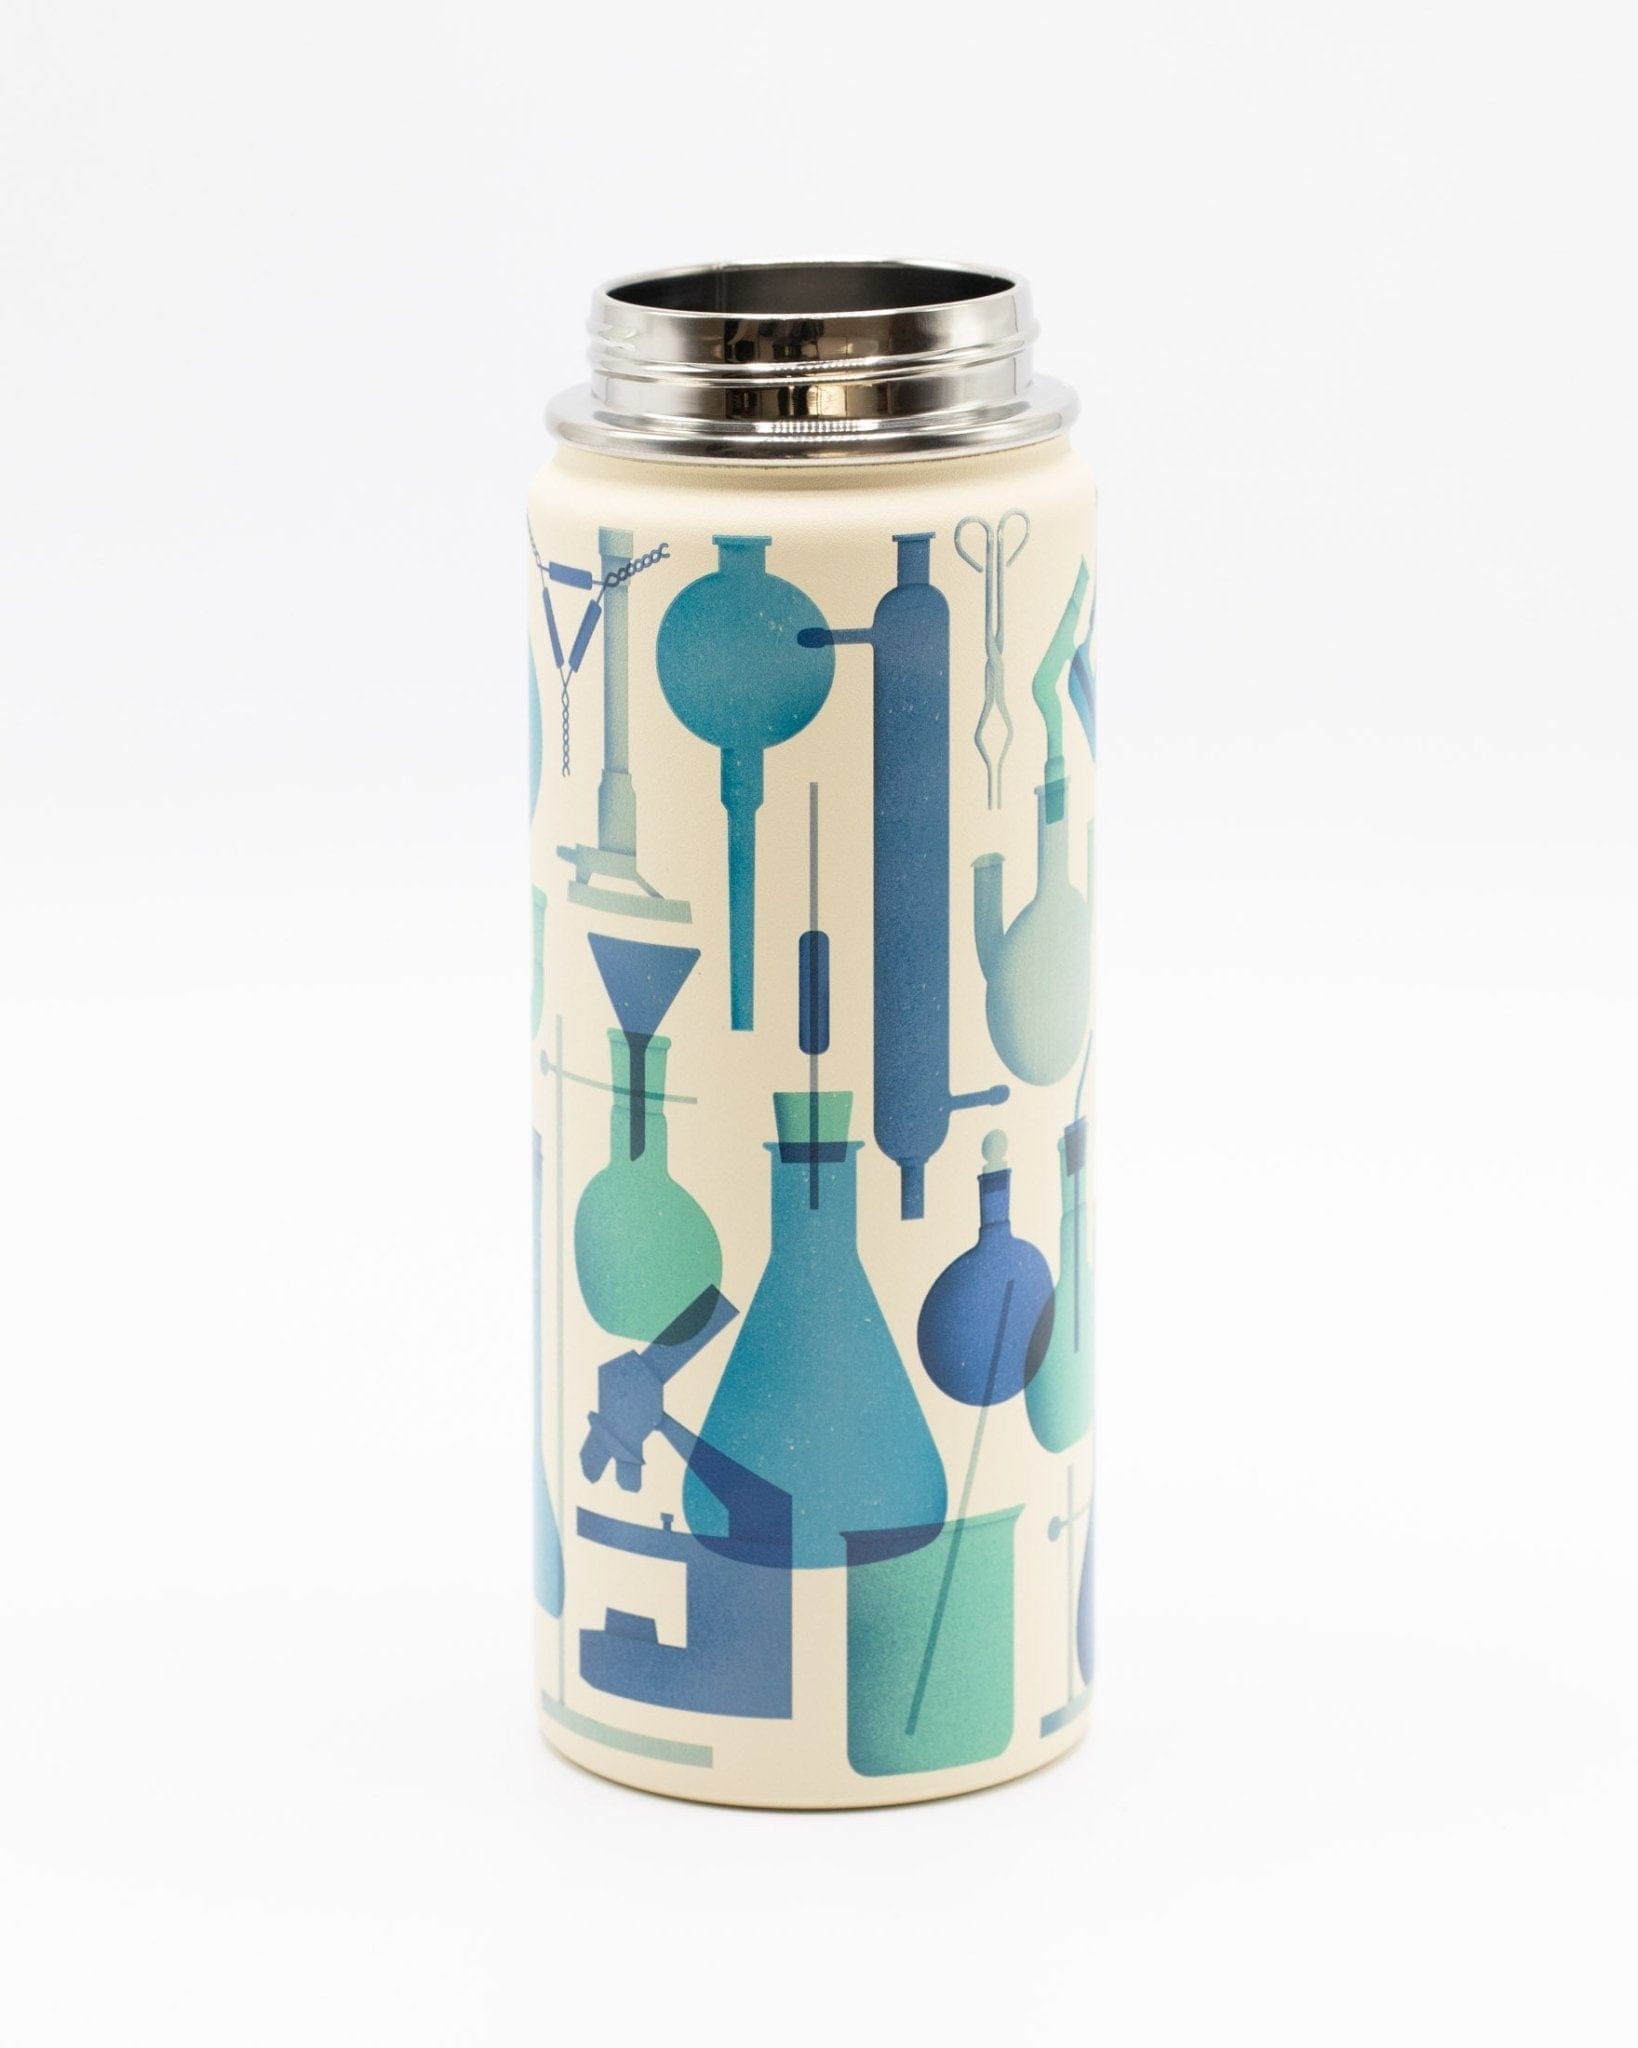 Infectious Disease Stainless Steel Vacuum Flask / Insulated Travel Mug